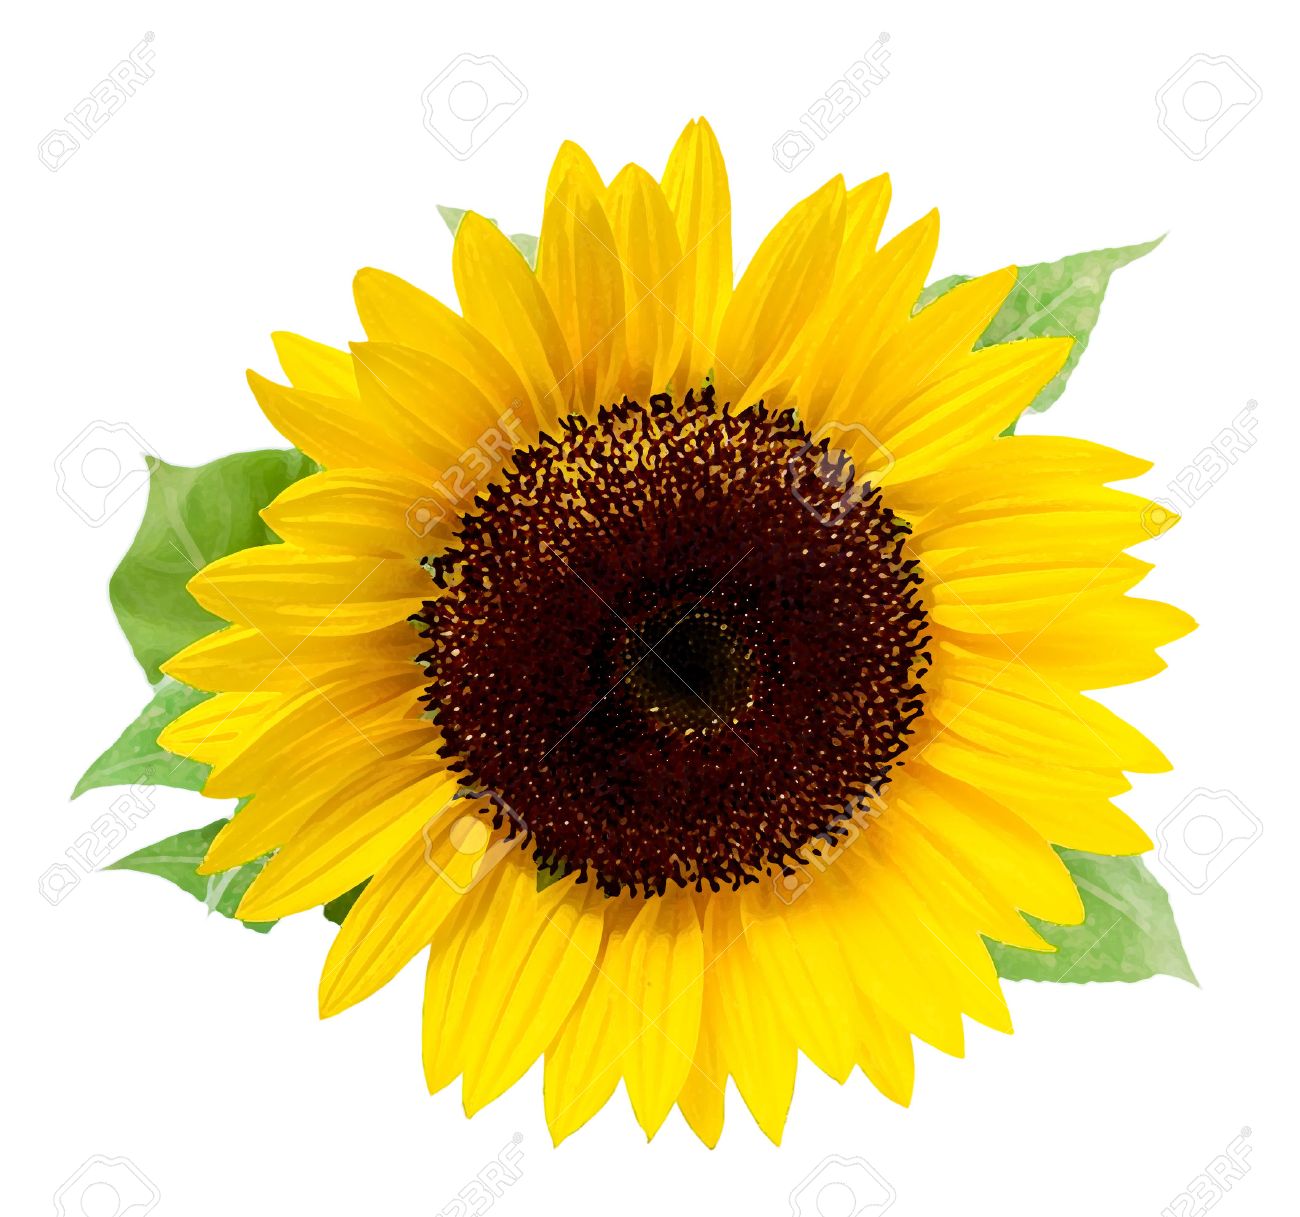 Sunflower, isolated on a white background. Illustration in the style of  watercolor paintings.